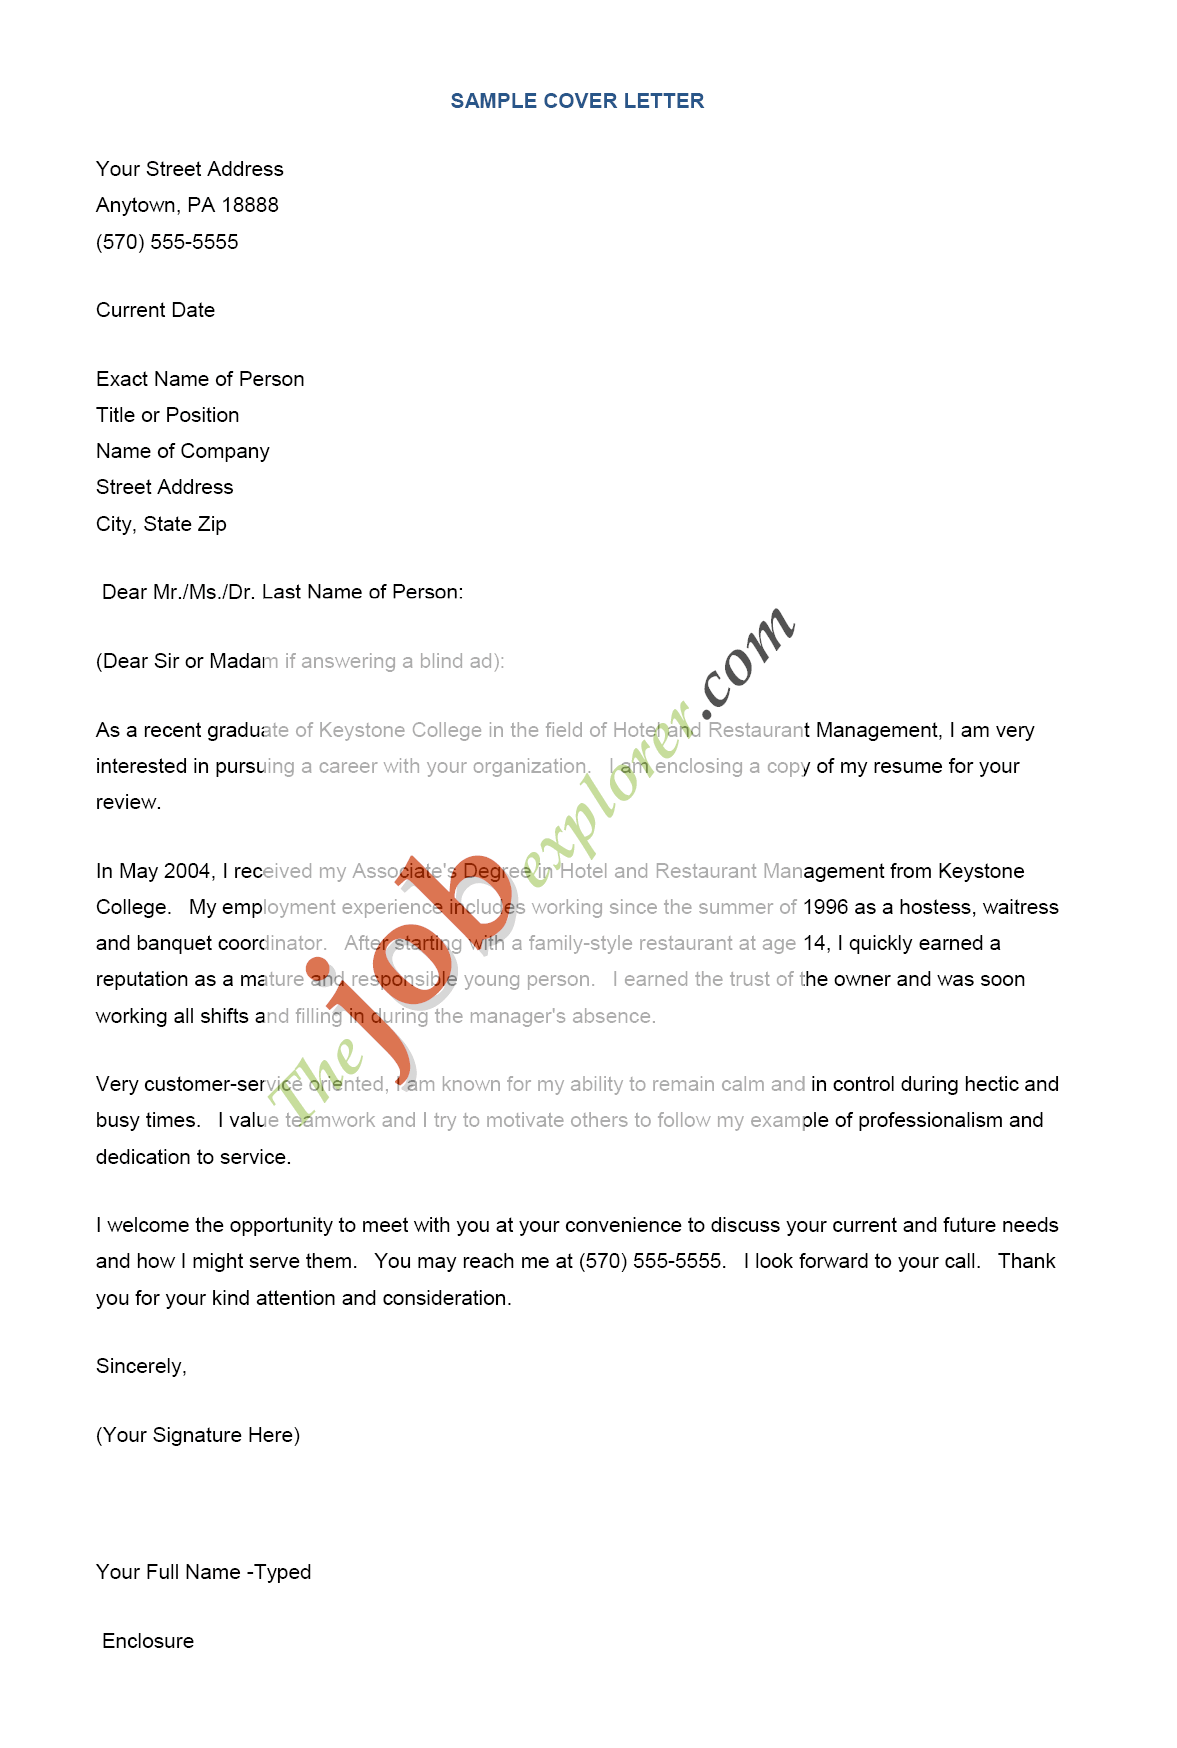 Cover Letter Samples and Writing Guide | Resume Genius